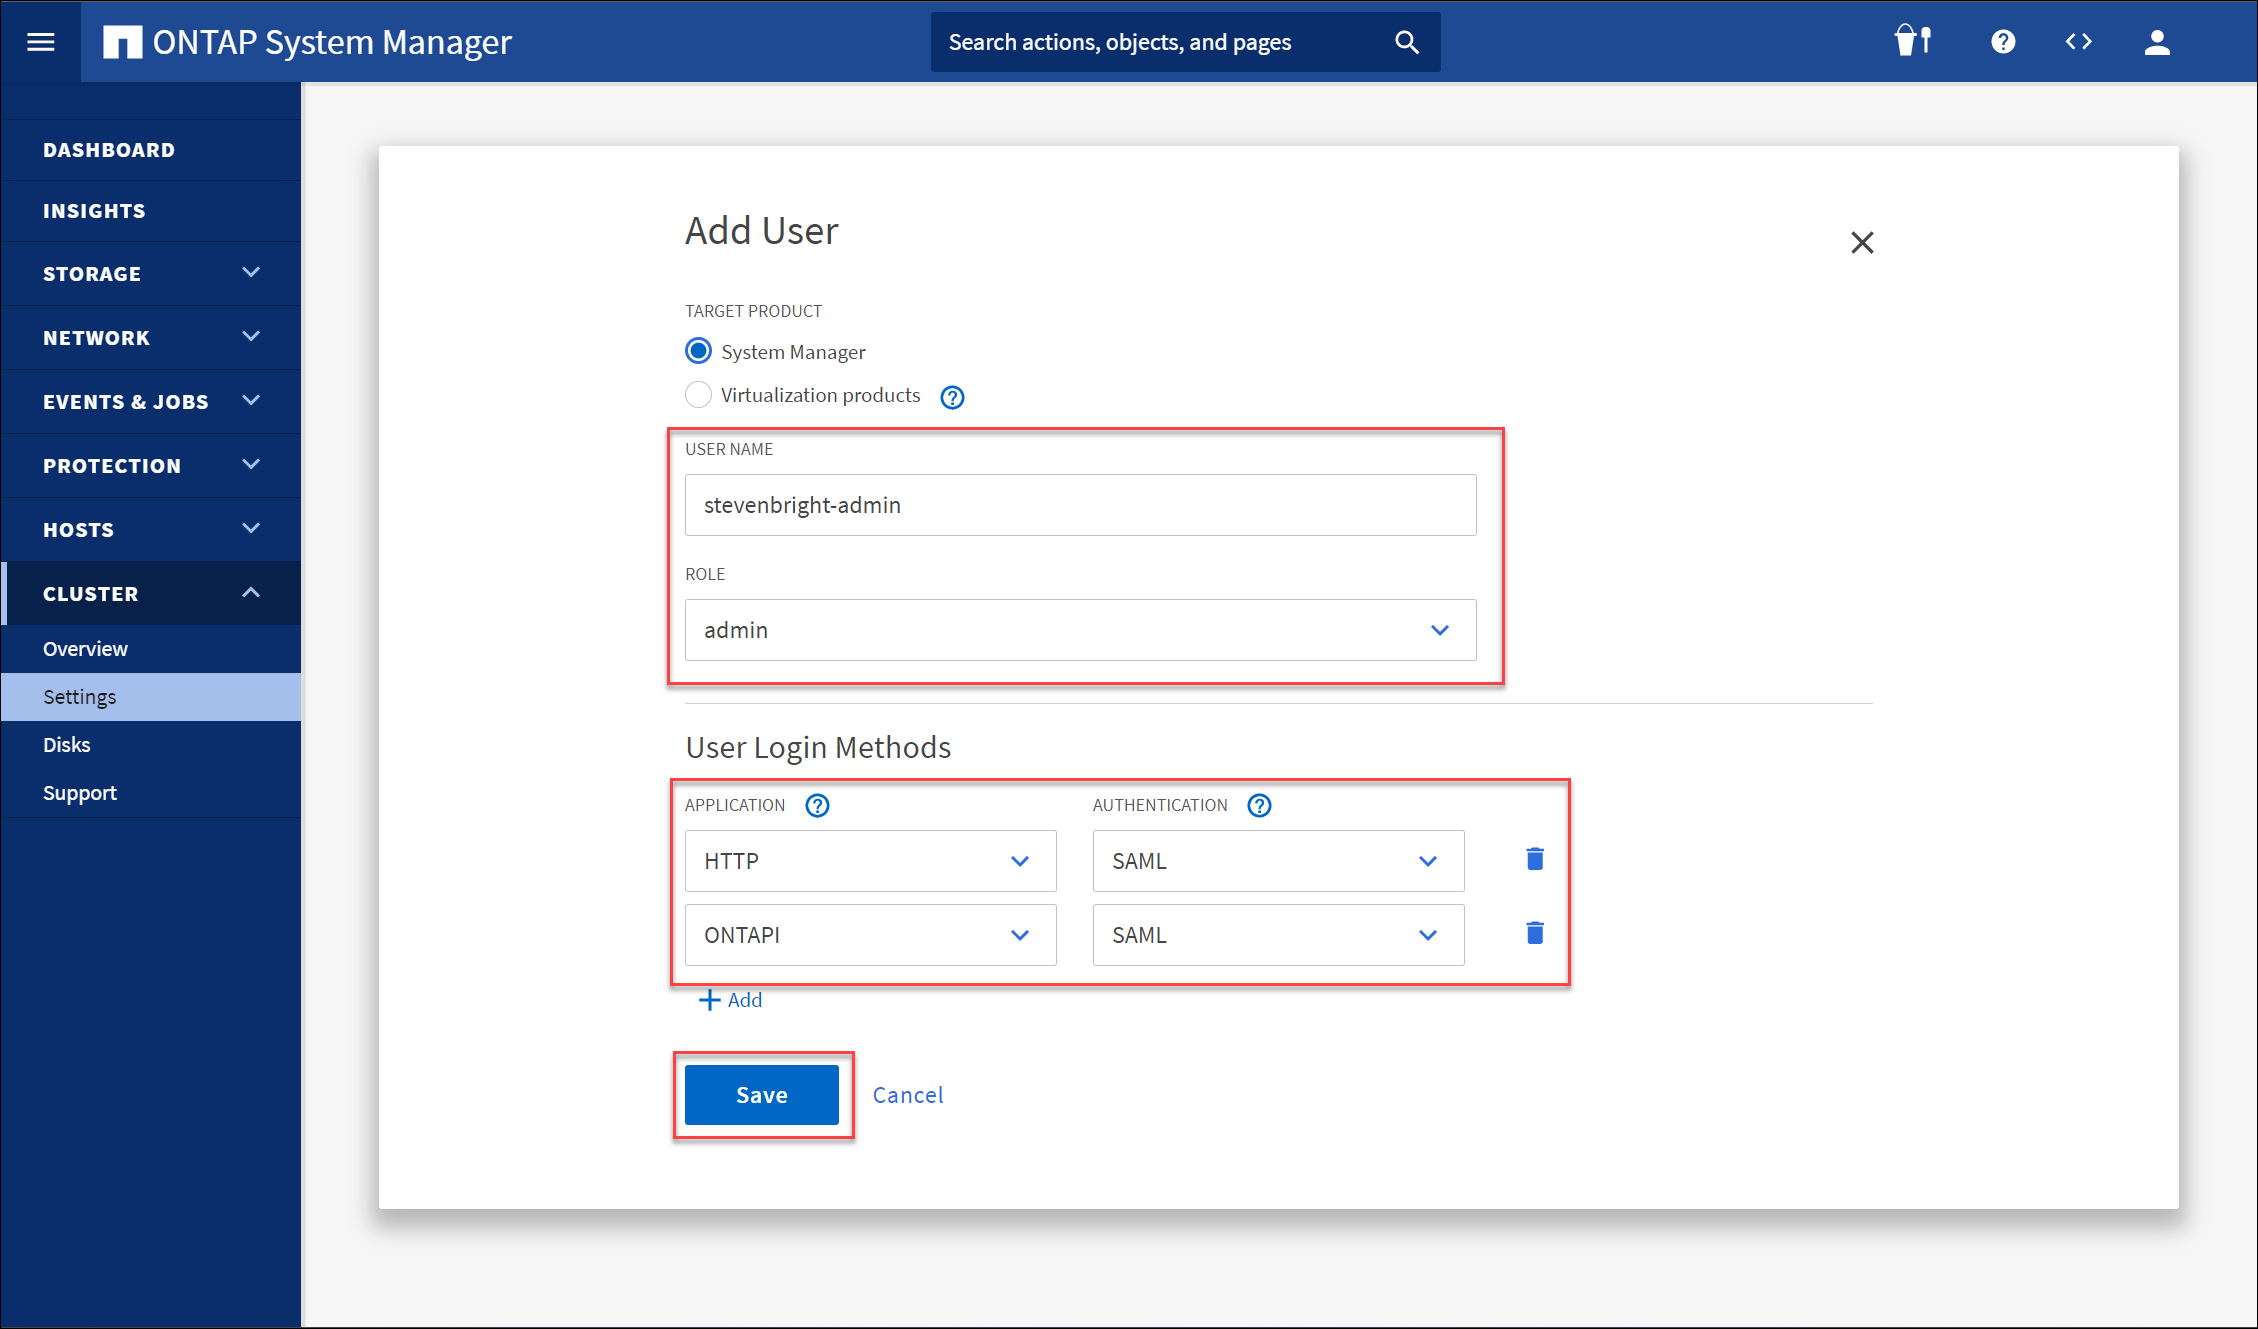 Screenshot of the NetApp ONTAP System Manager - Cluster Settings - Users and Roles - Add User UI